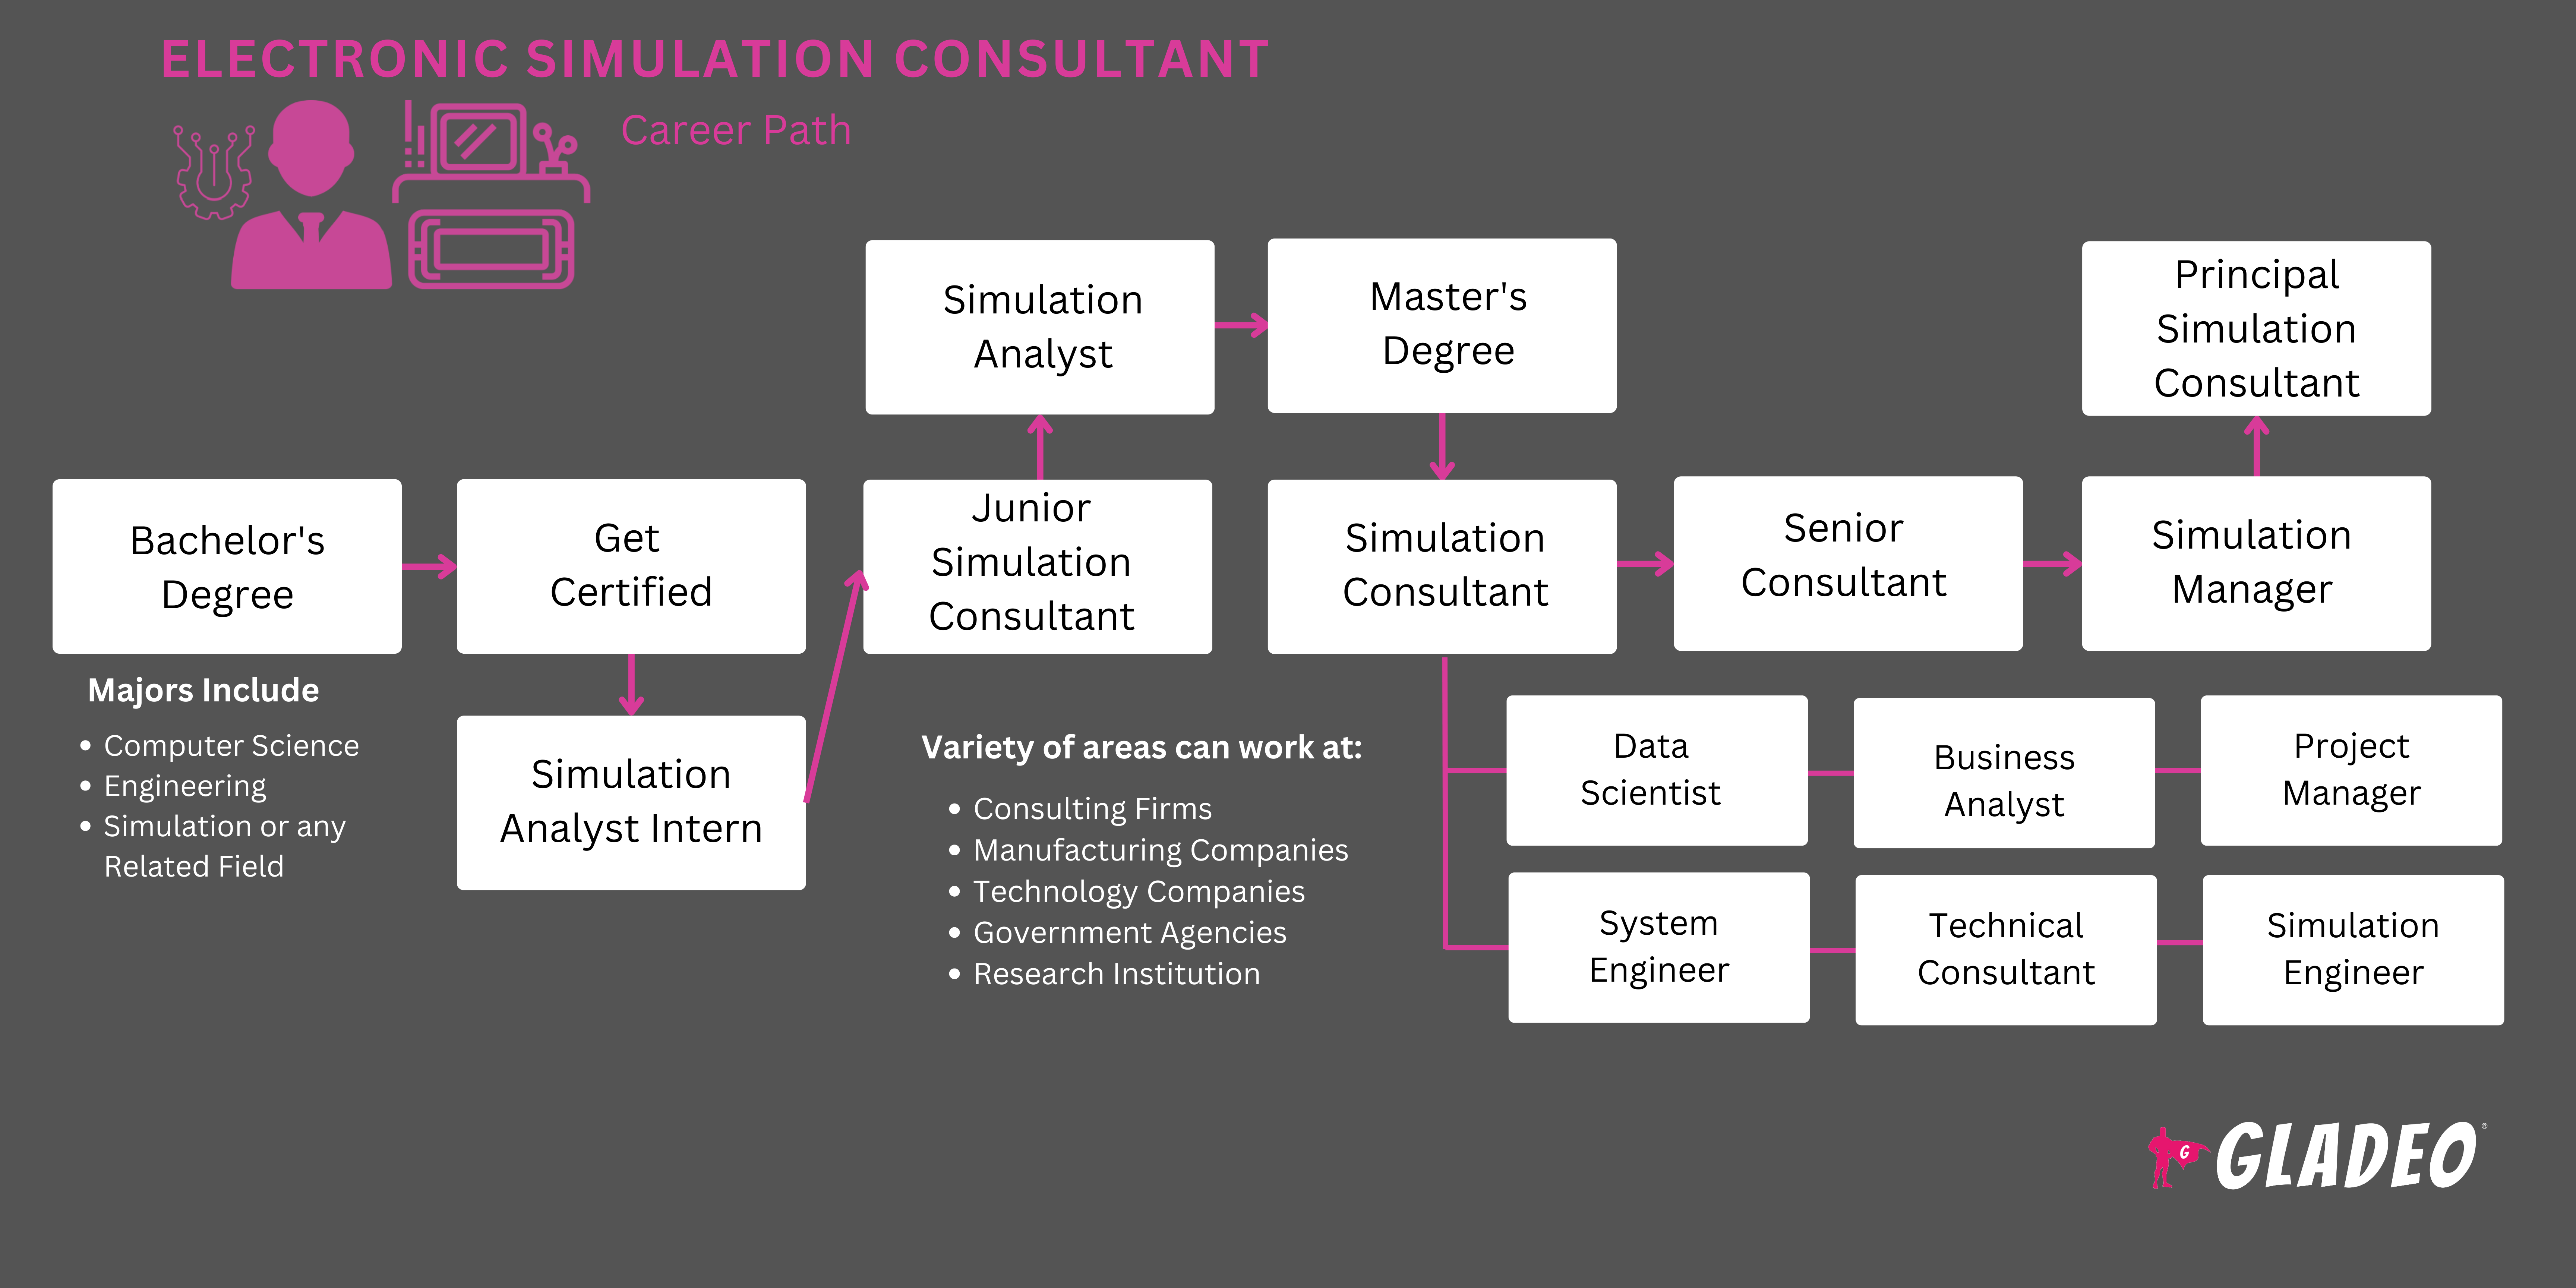 Roadmap ng Electronic Simulation Consultant